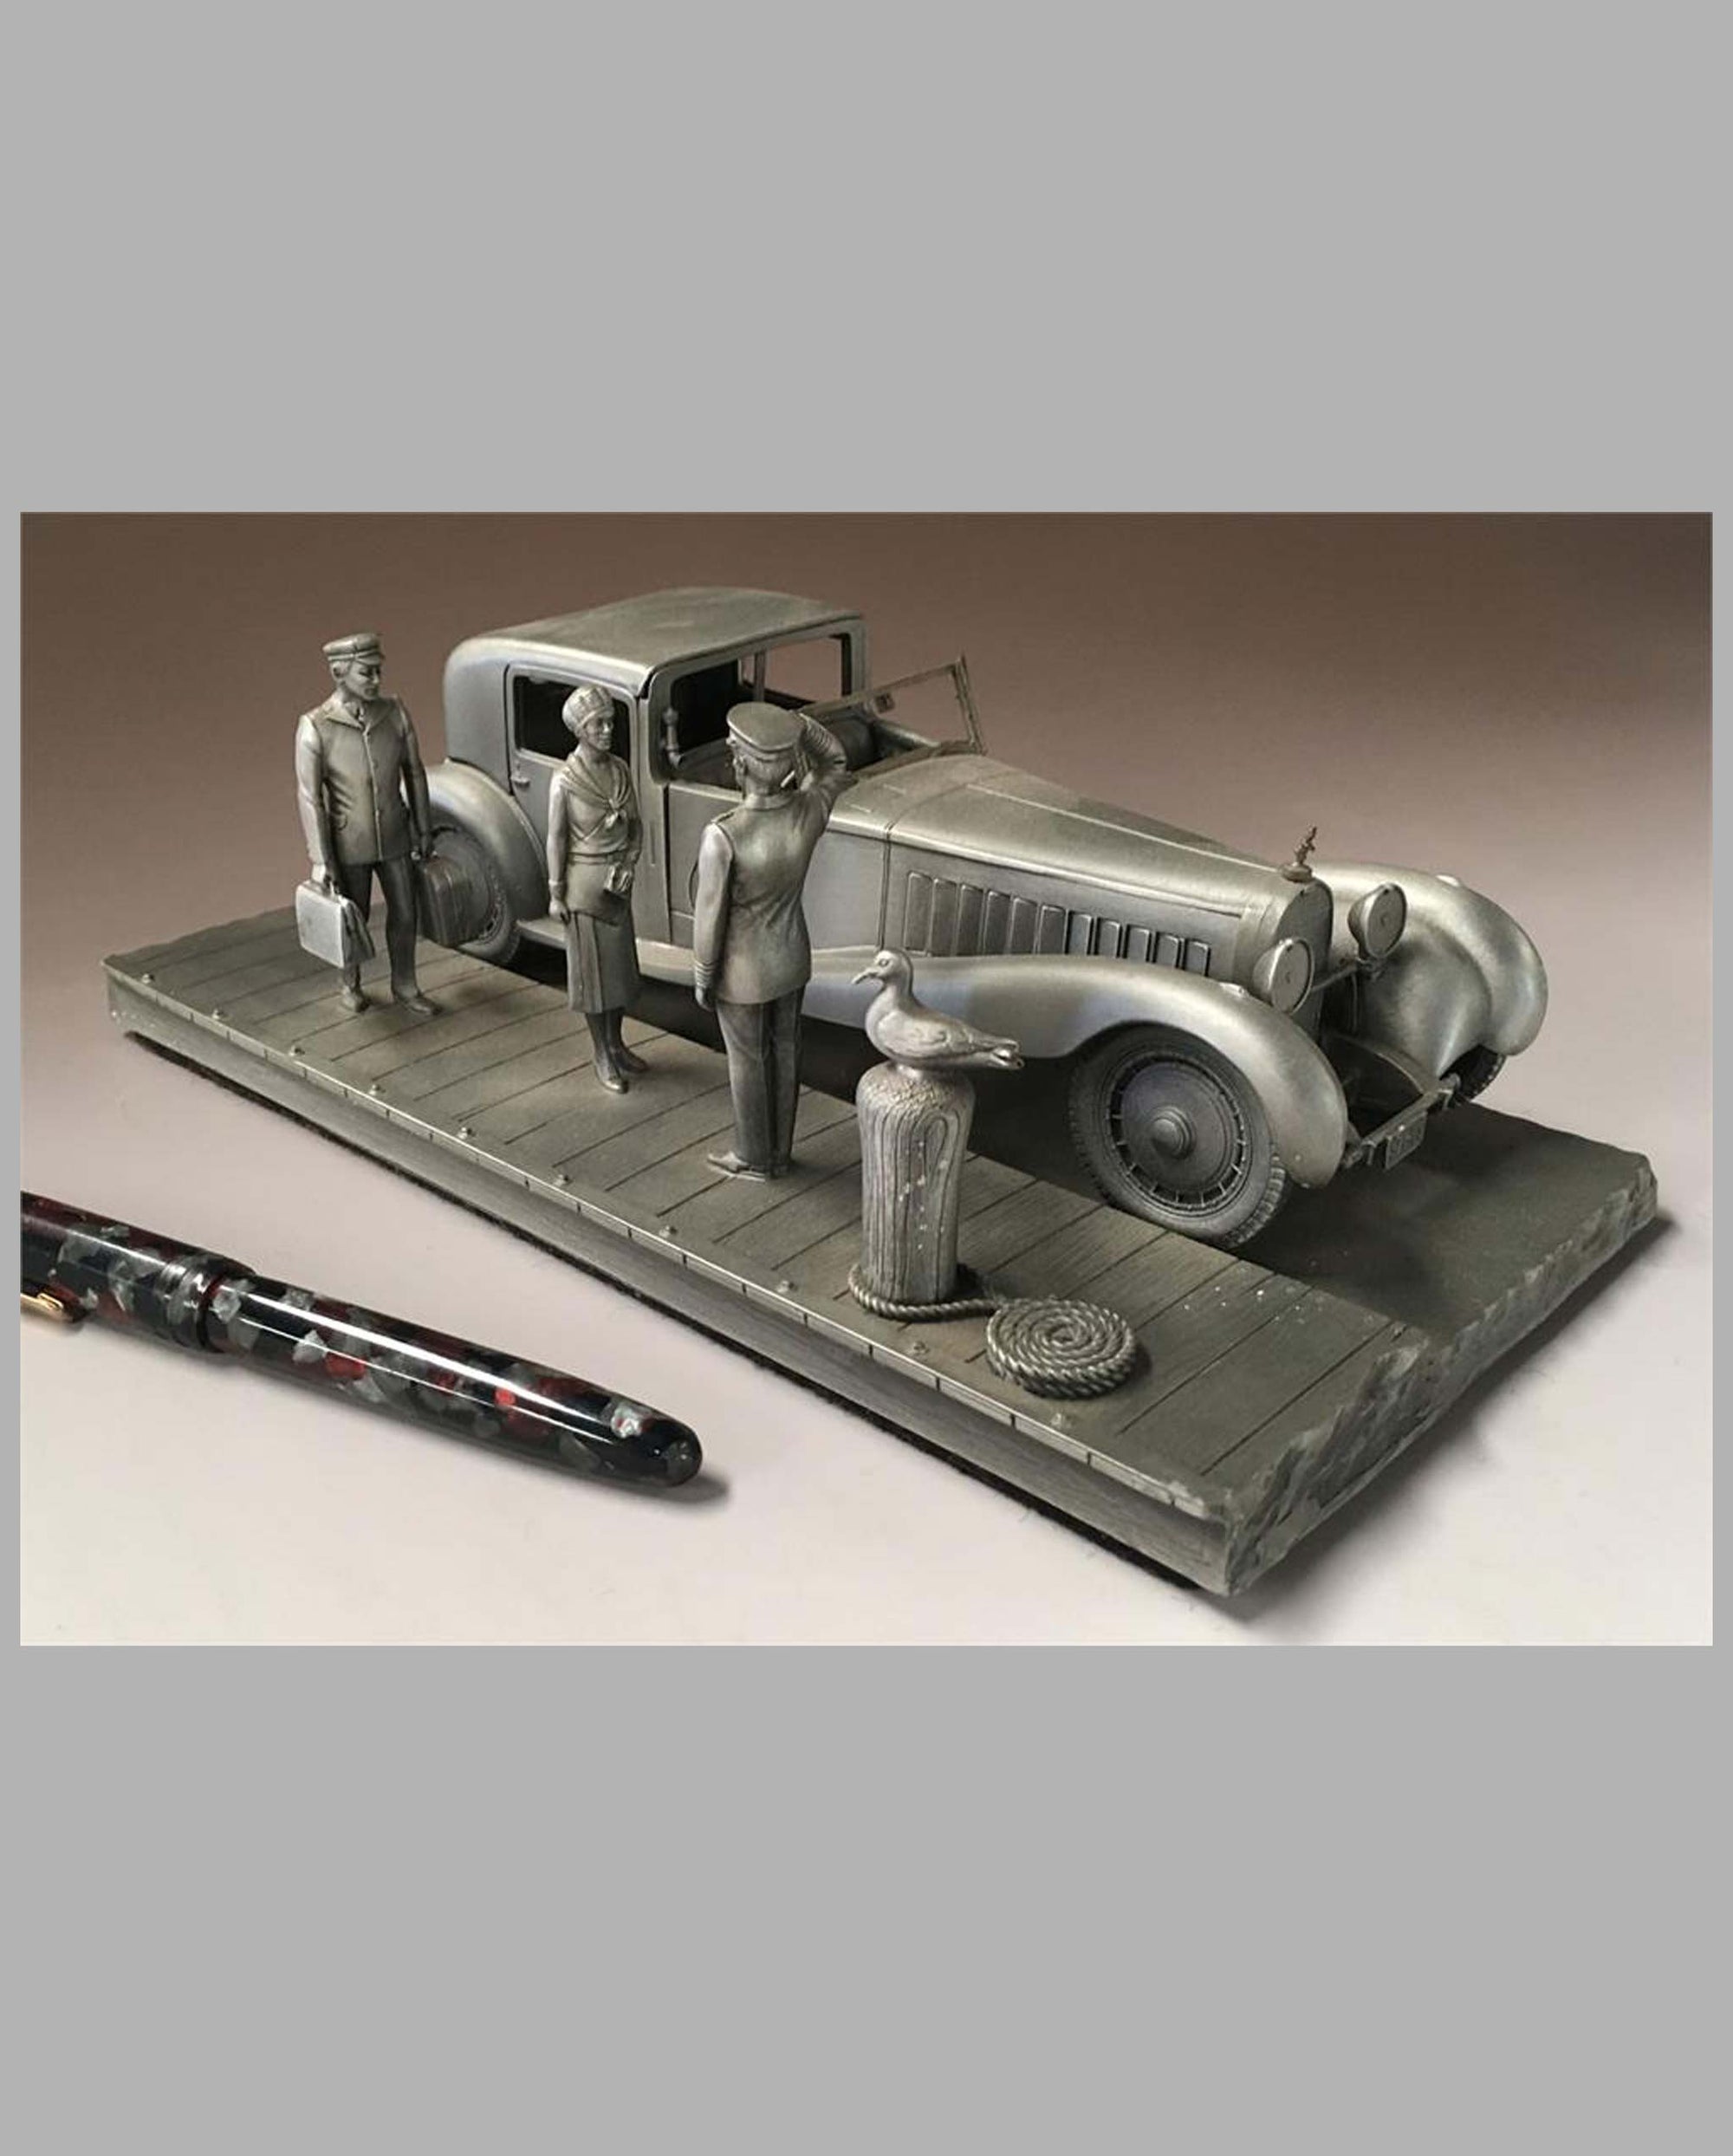 The Bugatti Royale Pewter Sculpture by Raymond Meyers, detailing wealthy couple and driver with luggage